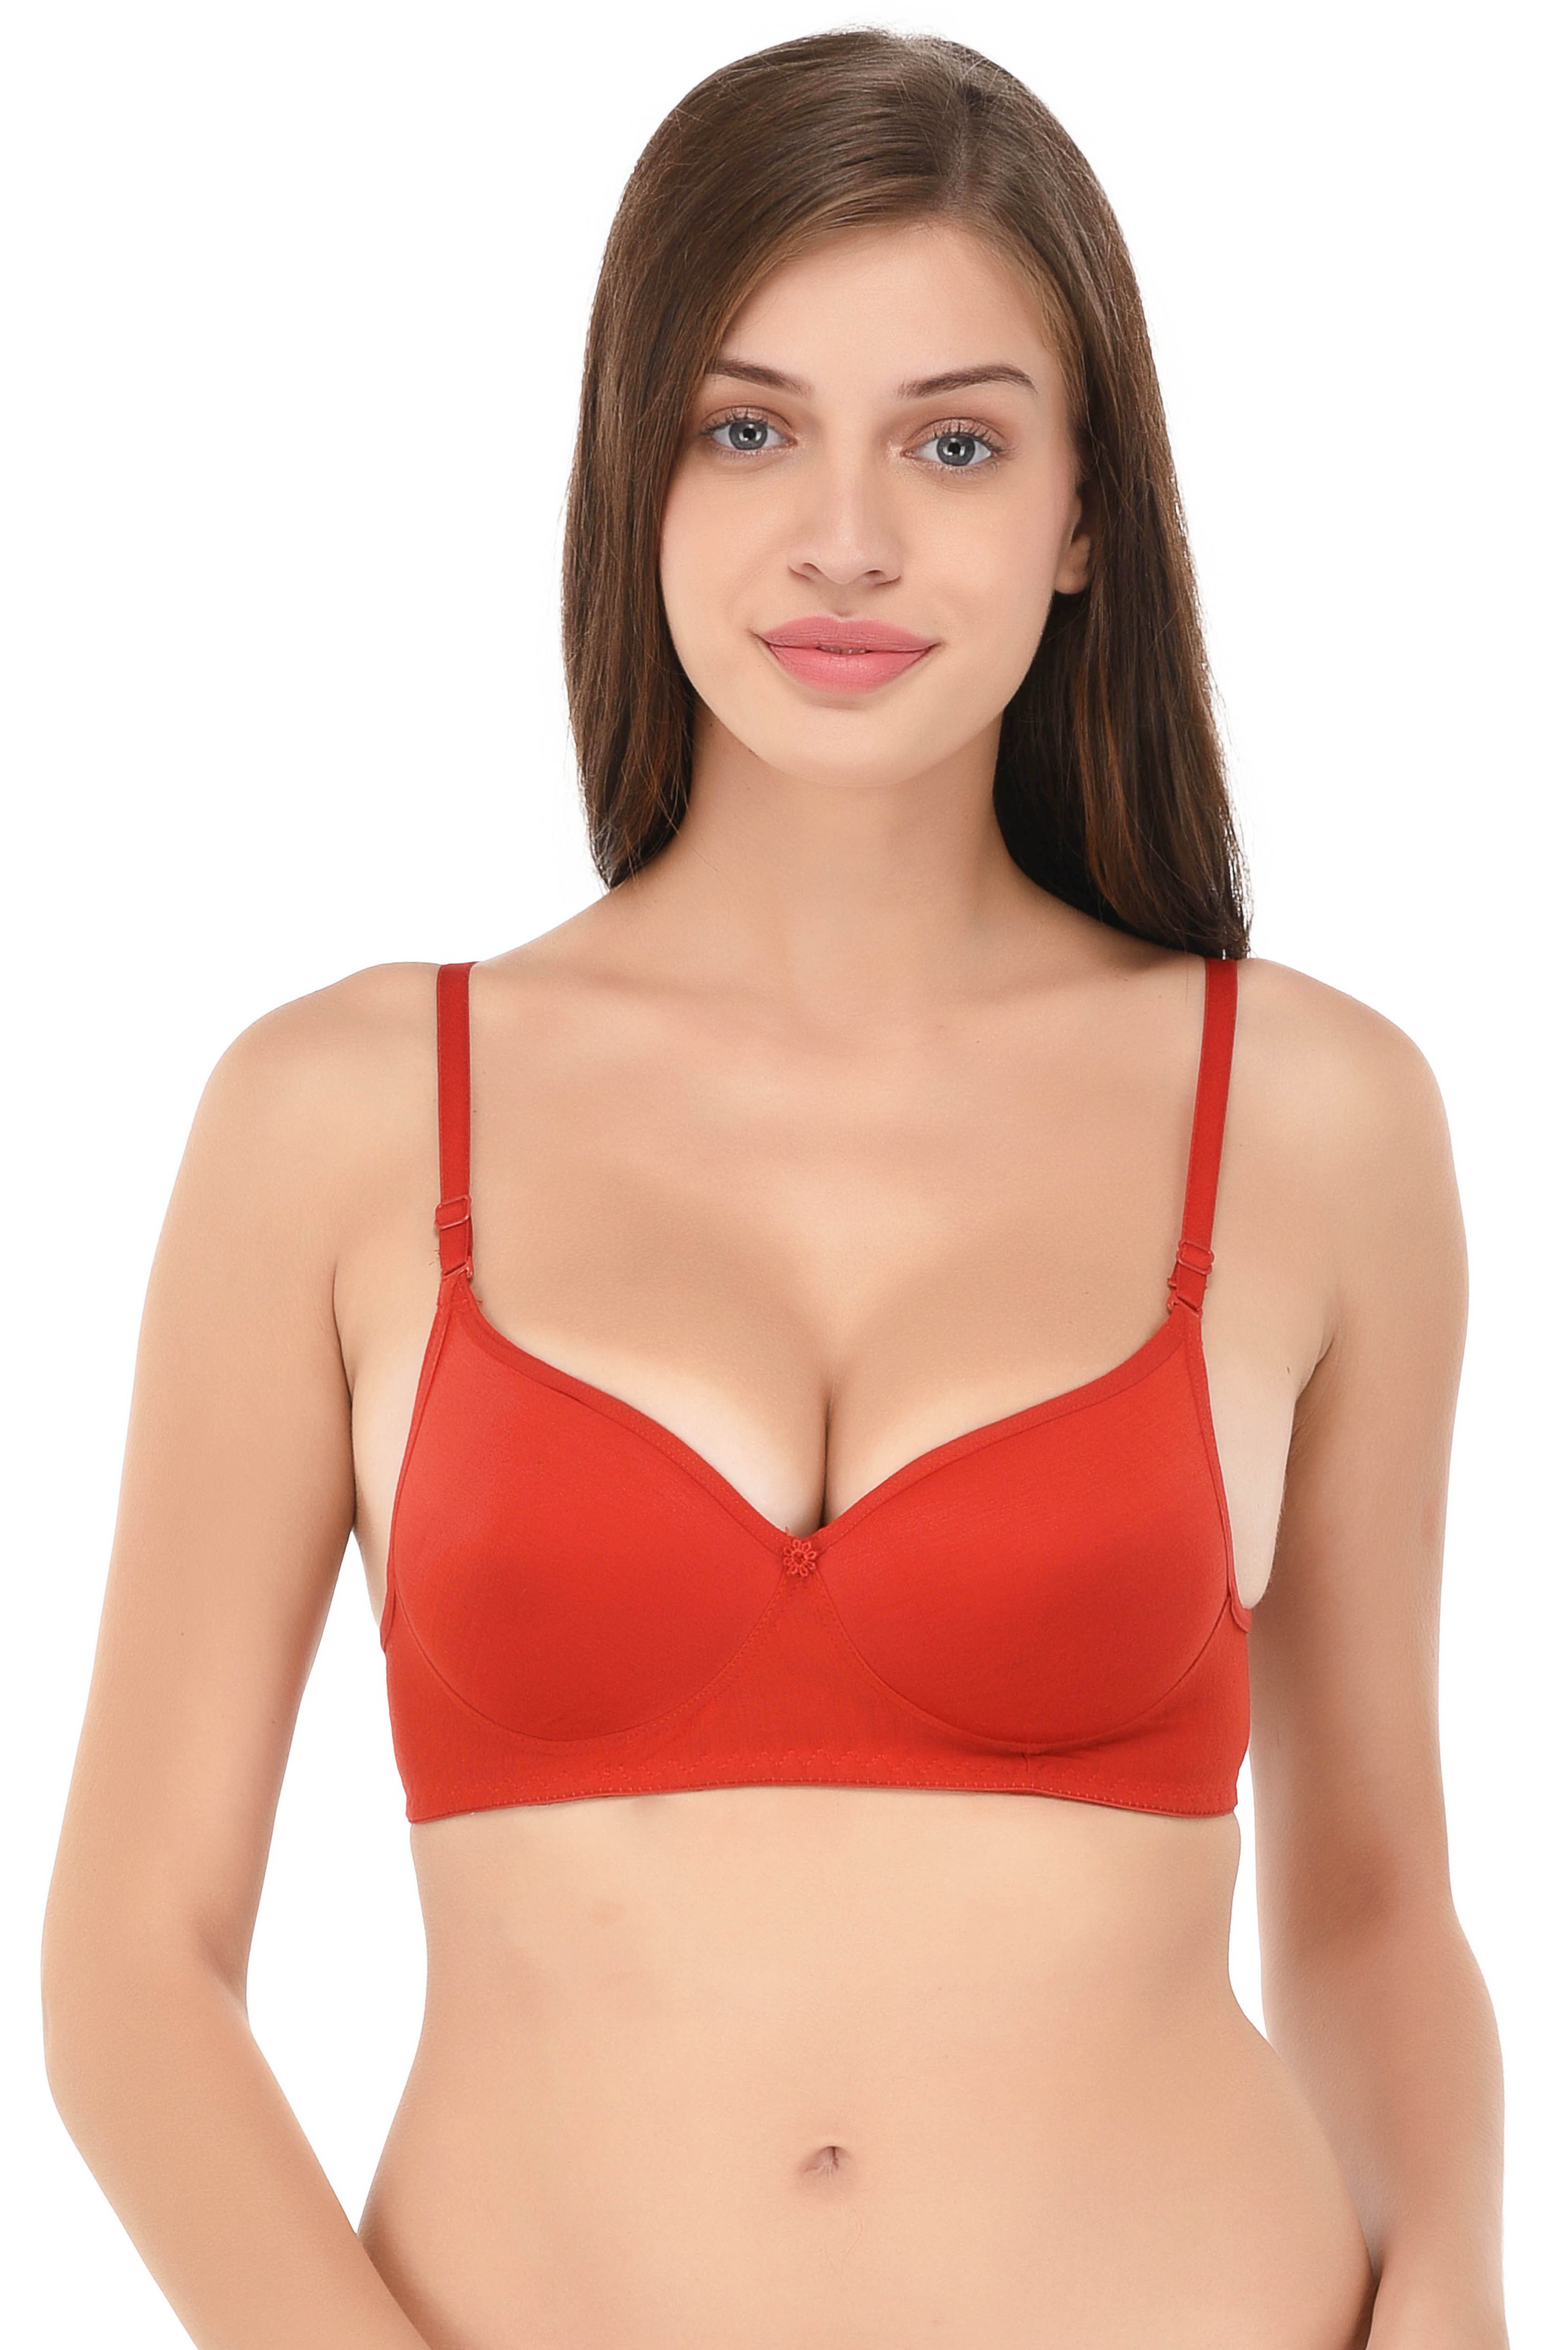 Buy Lizaray Cotton Push Up Bra Red Online At Best Prices In India Snapdeal